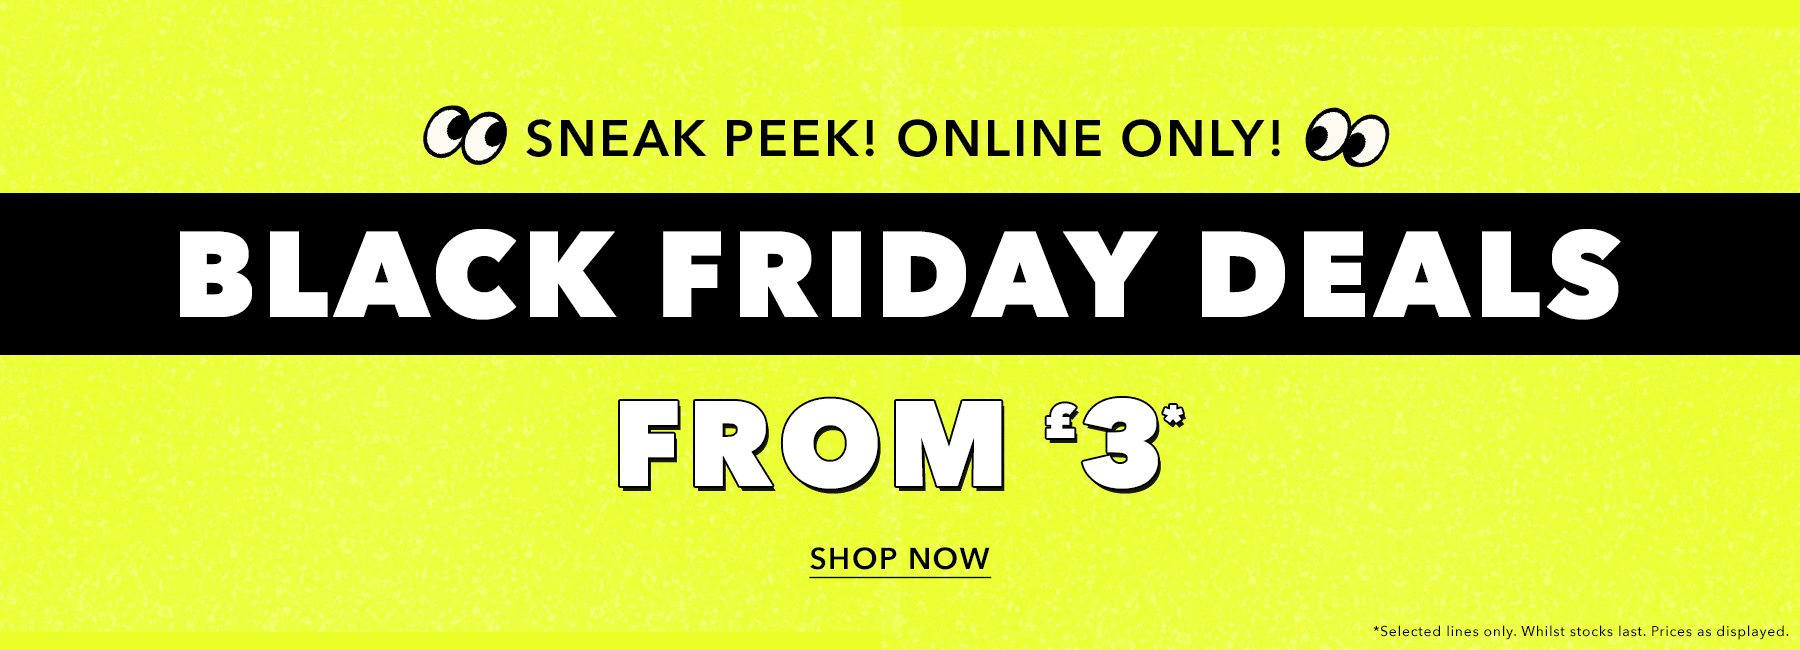 Black Friday Forever 21: selected lines from £3